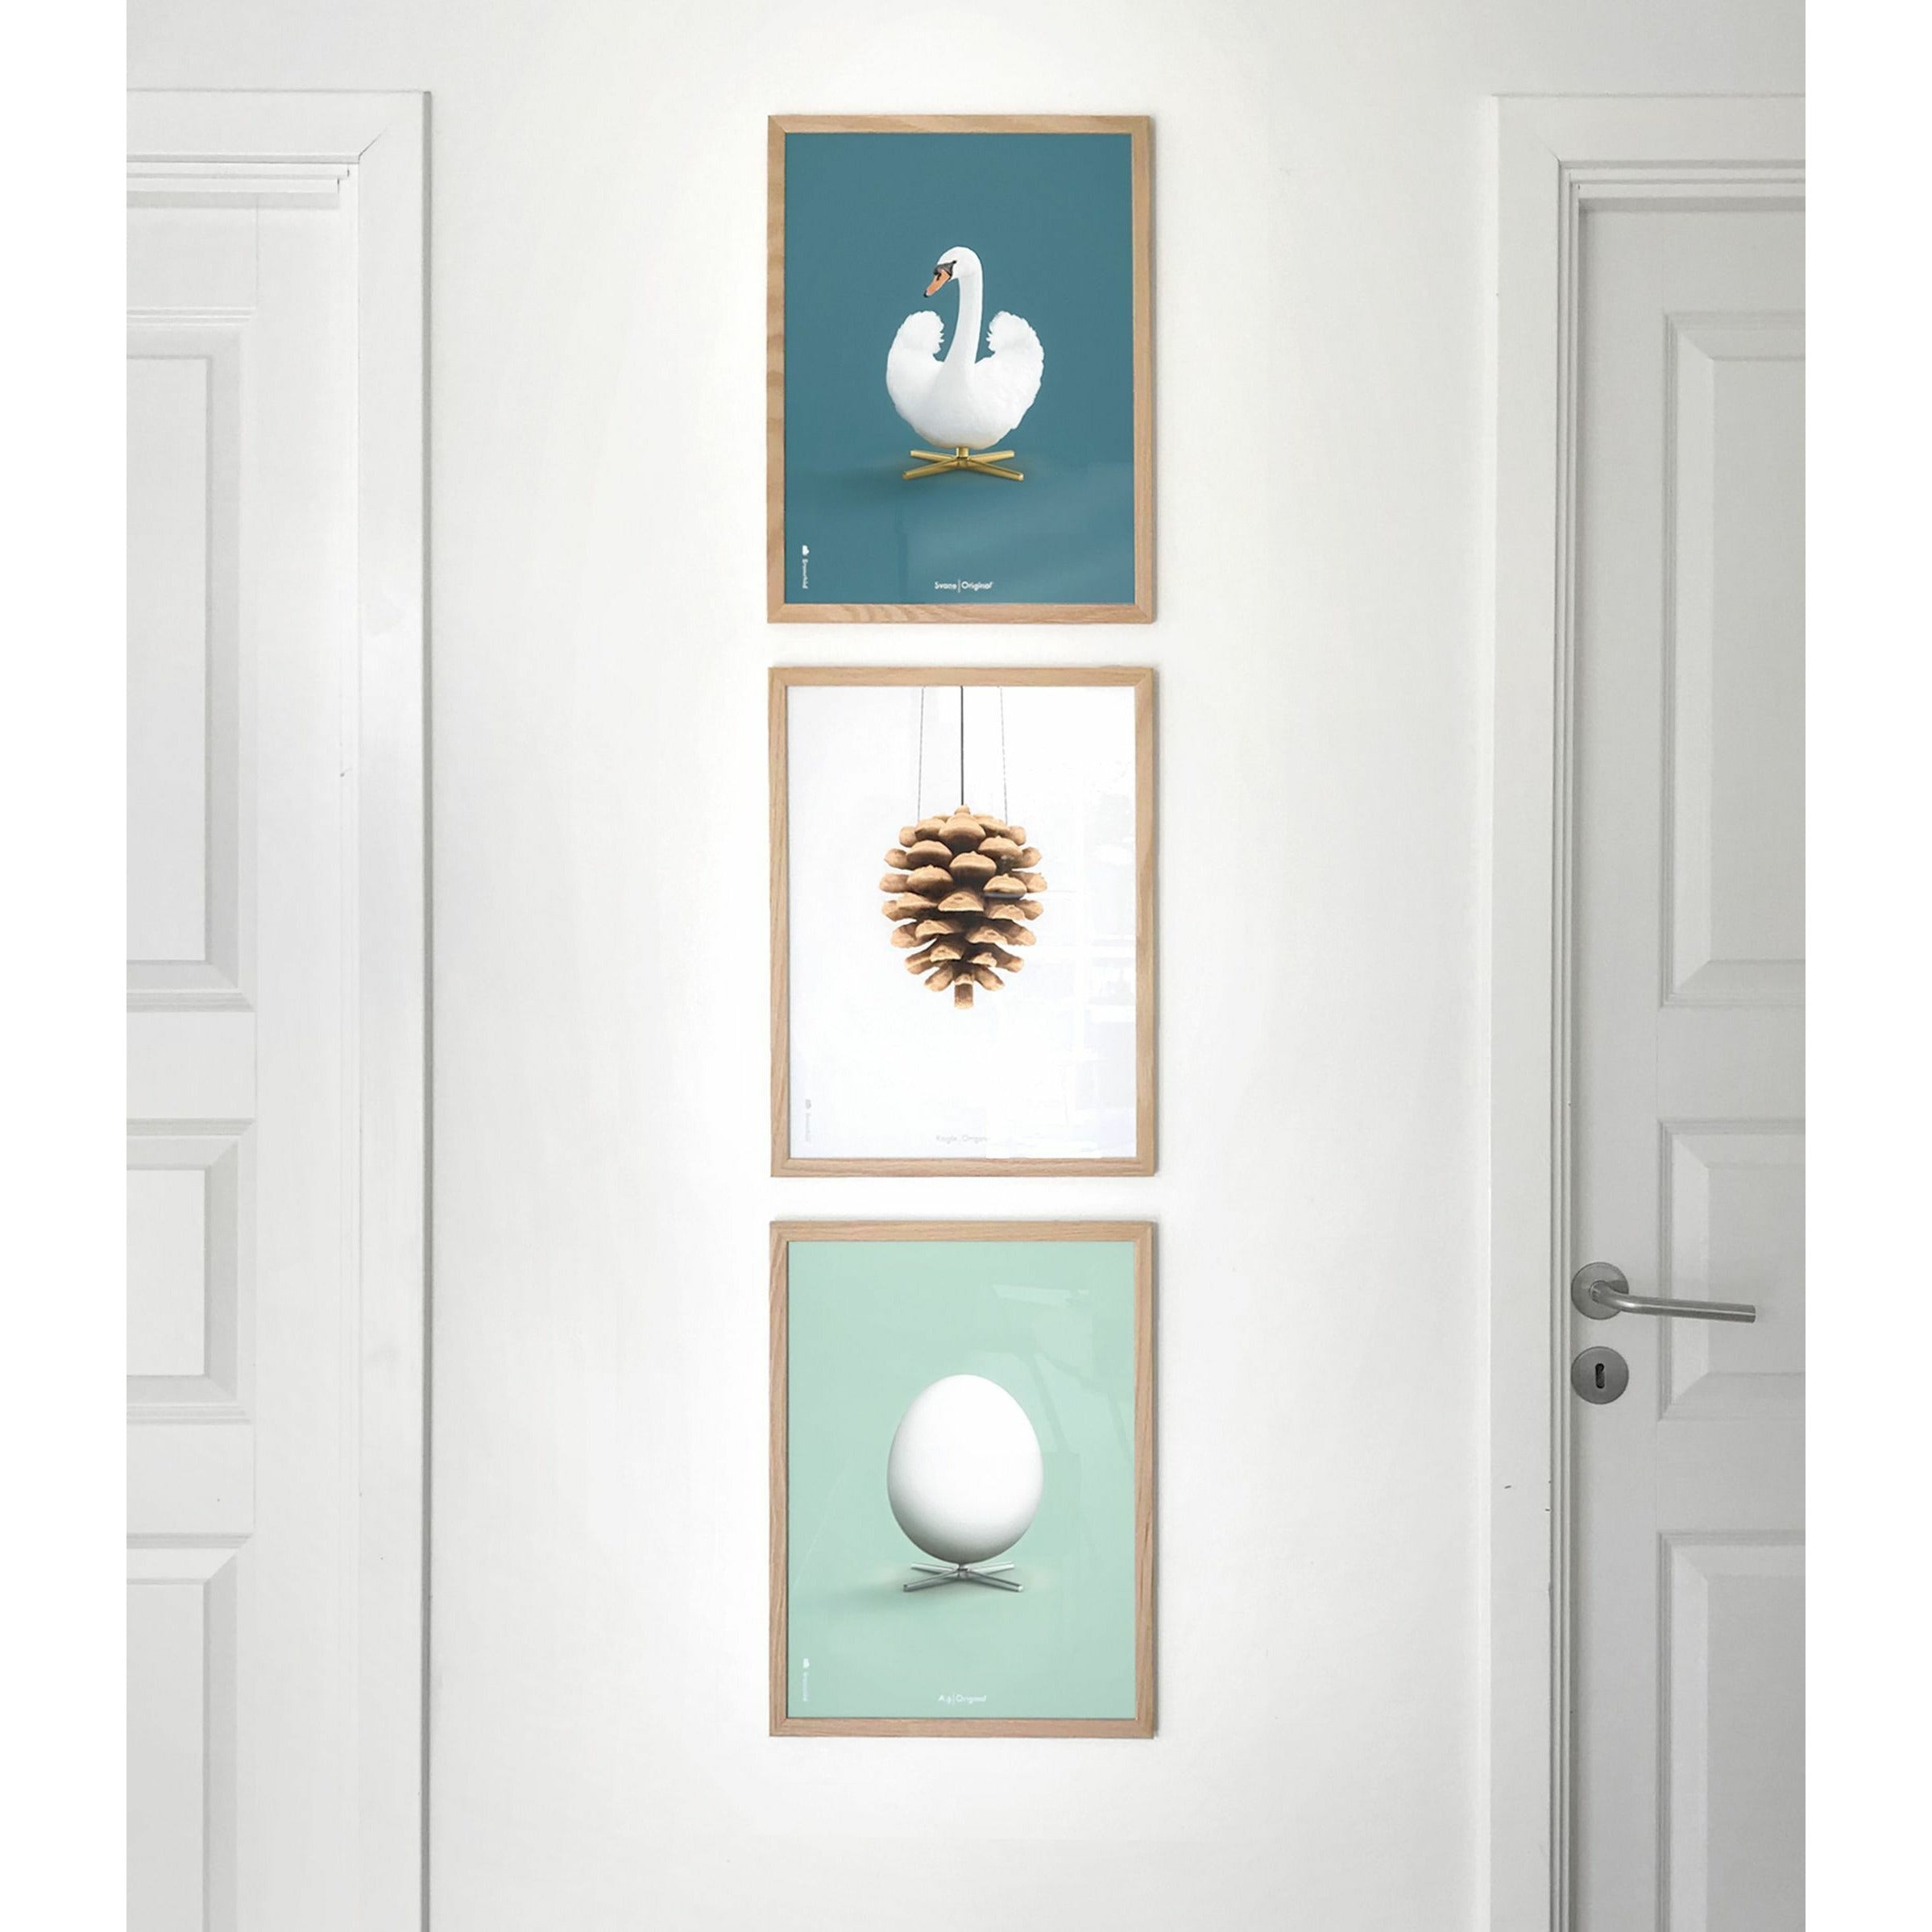 Brainchild Pine Cone Classic Poster, Frame Made Of Light Wood 30x40 Cm, White Background